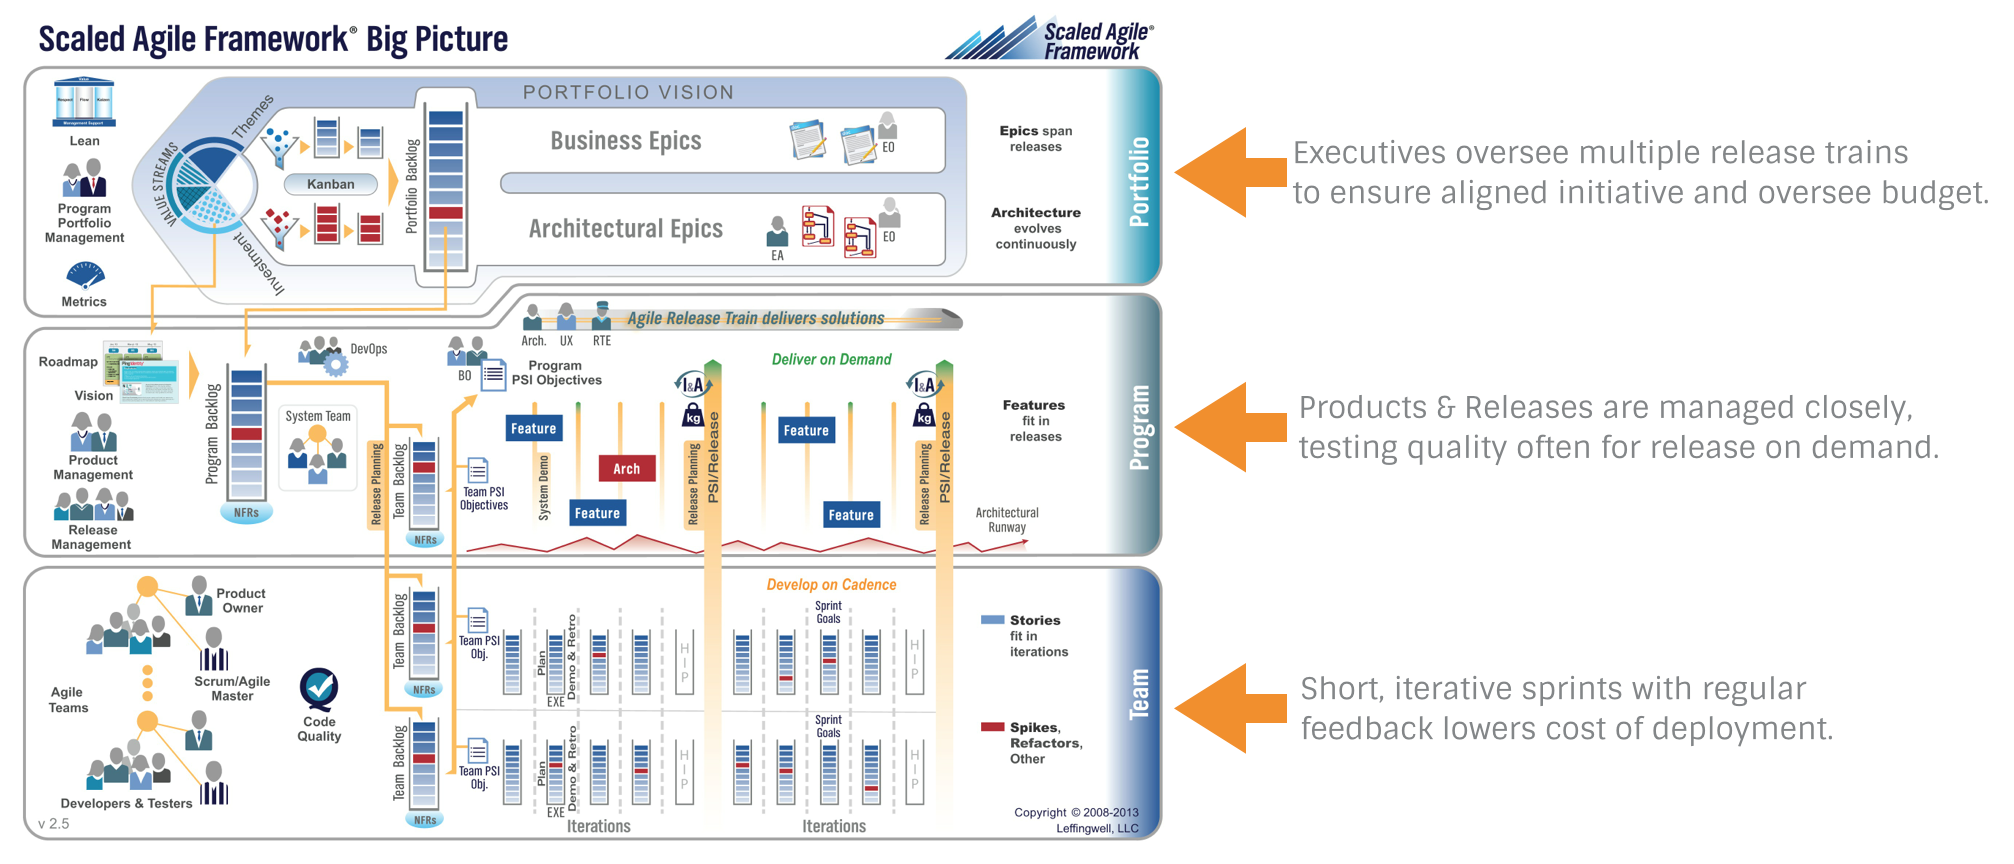 SAFe Cheat Sheet: A Guide to Scaled Agile Framework